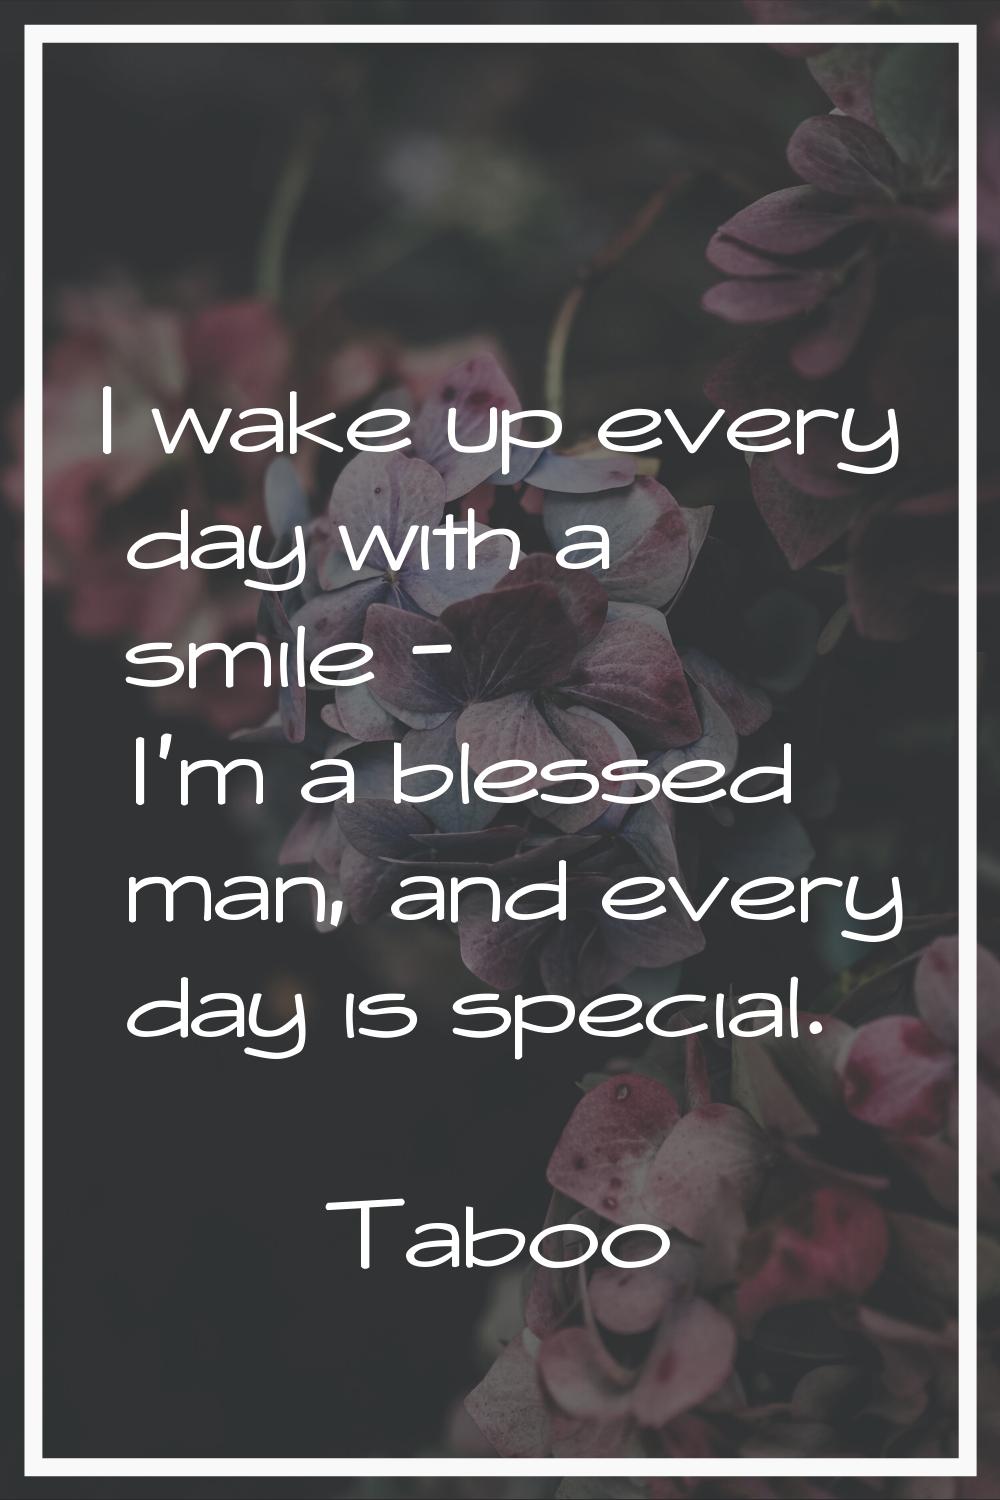 I wake up every day with a smile - I'm a blessed man, and every day is special.